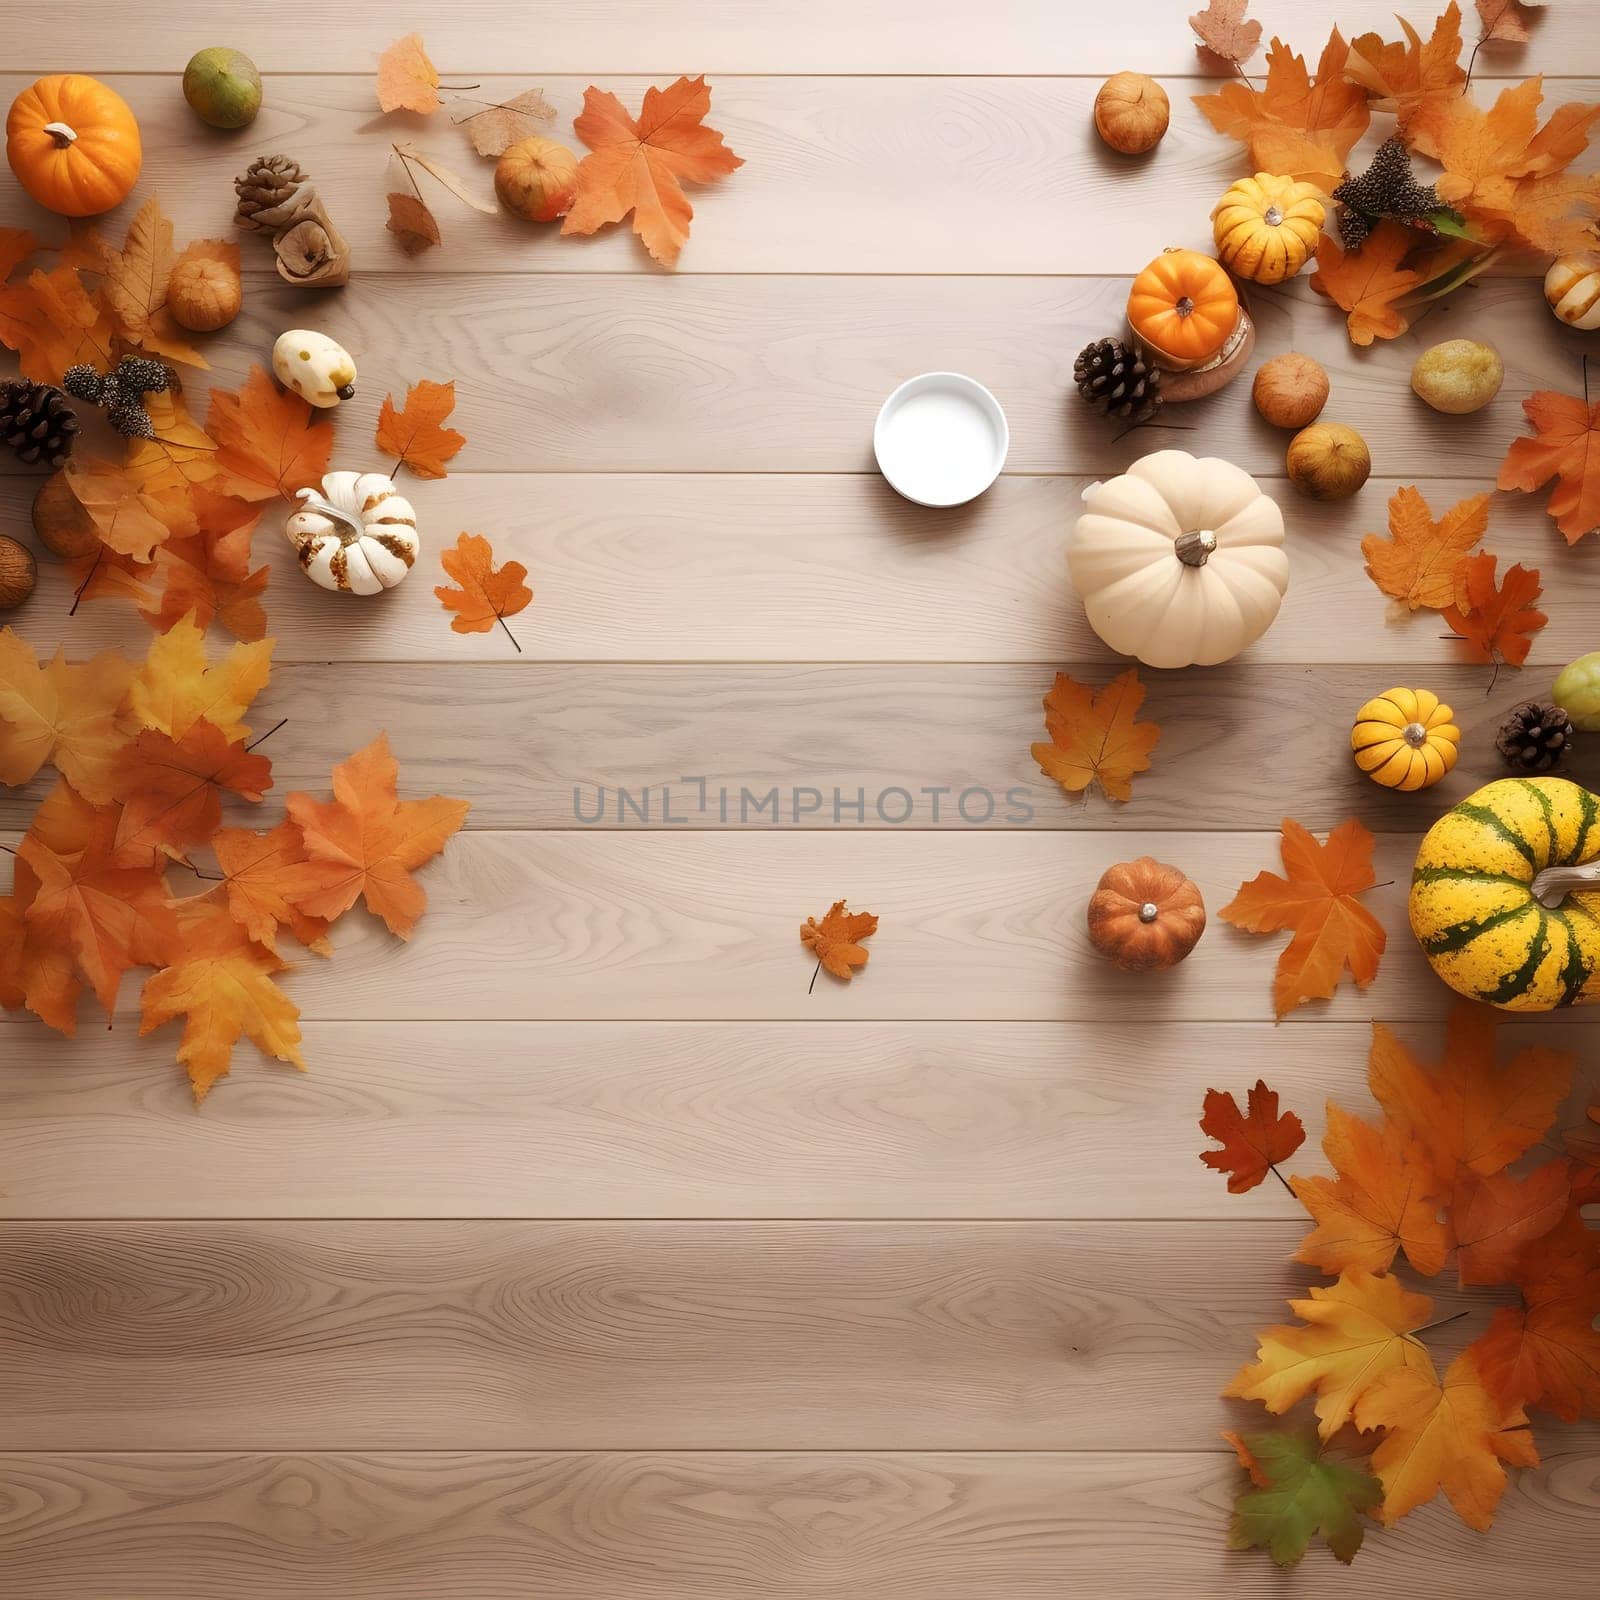 An aerial view of wooden planks, with scattered autumn leaves and pumpkins. Pumpkin as a dish of thanksgiving for the harvest. An atmosphere of joy and celebration.